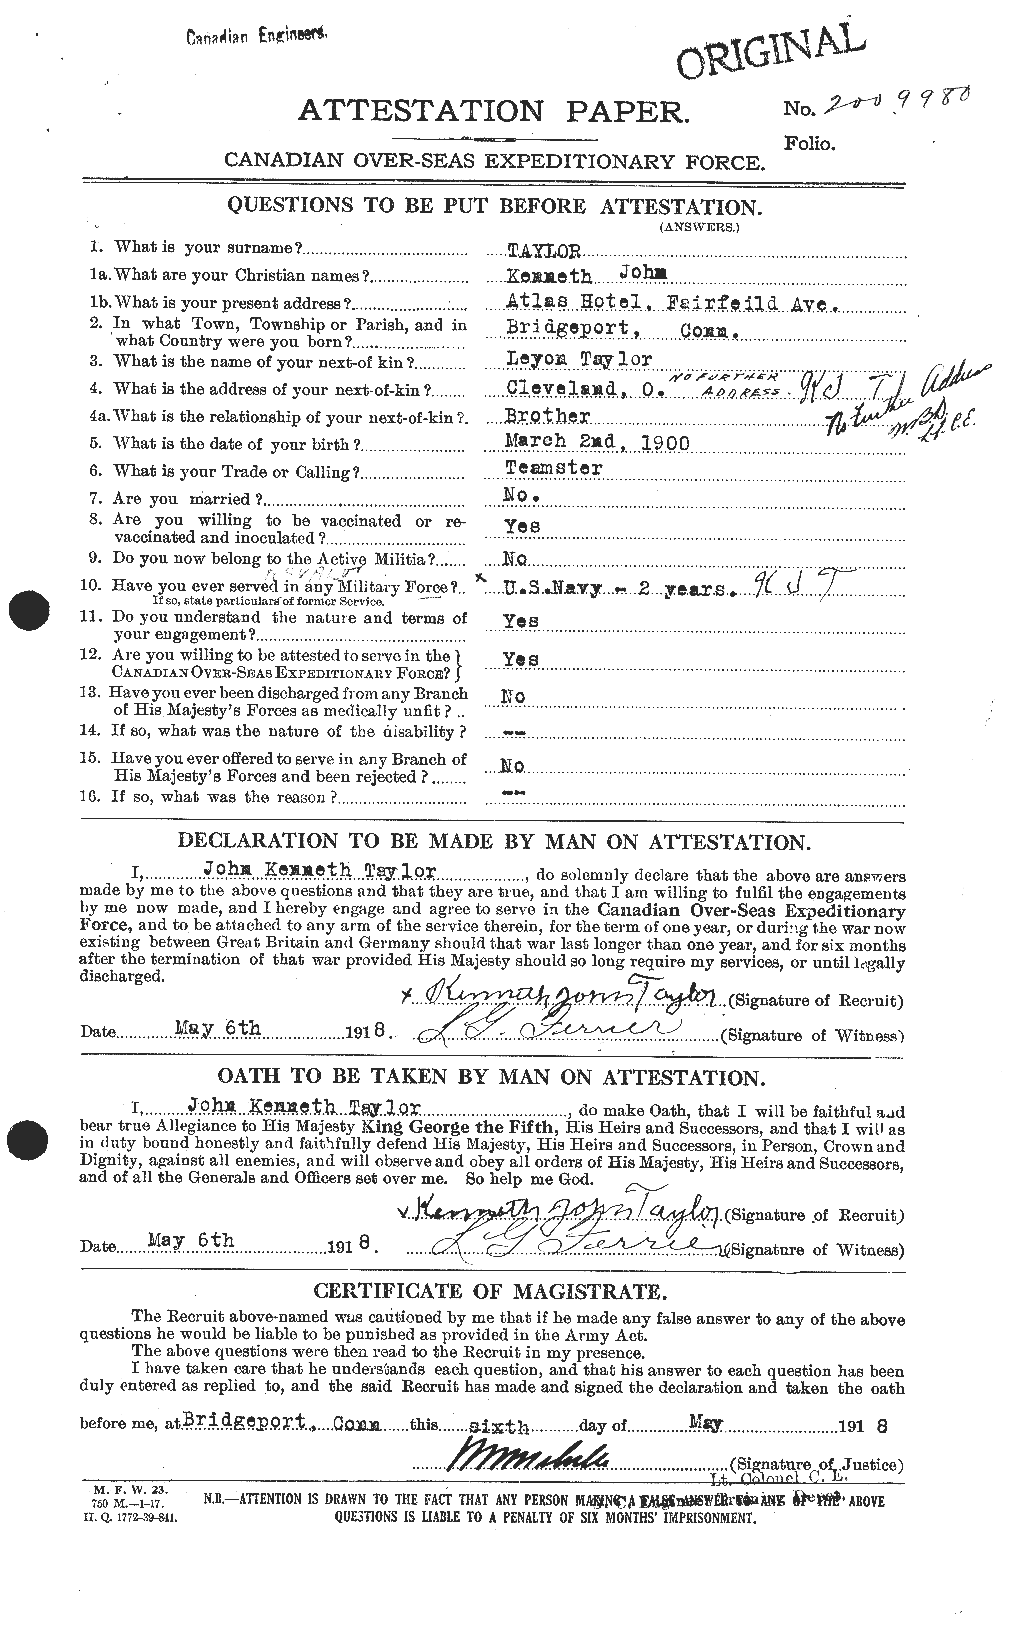 Personnel Records of the First World War - CEF 627598a